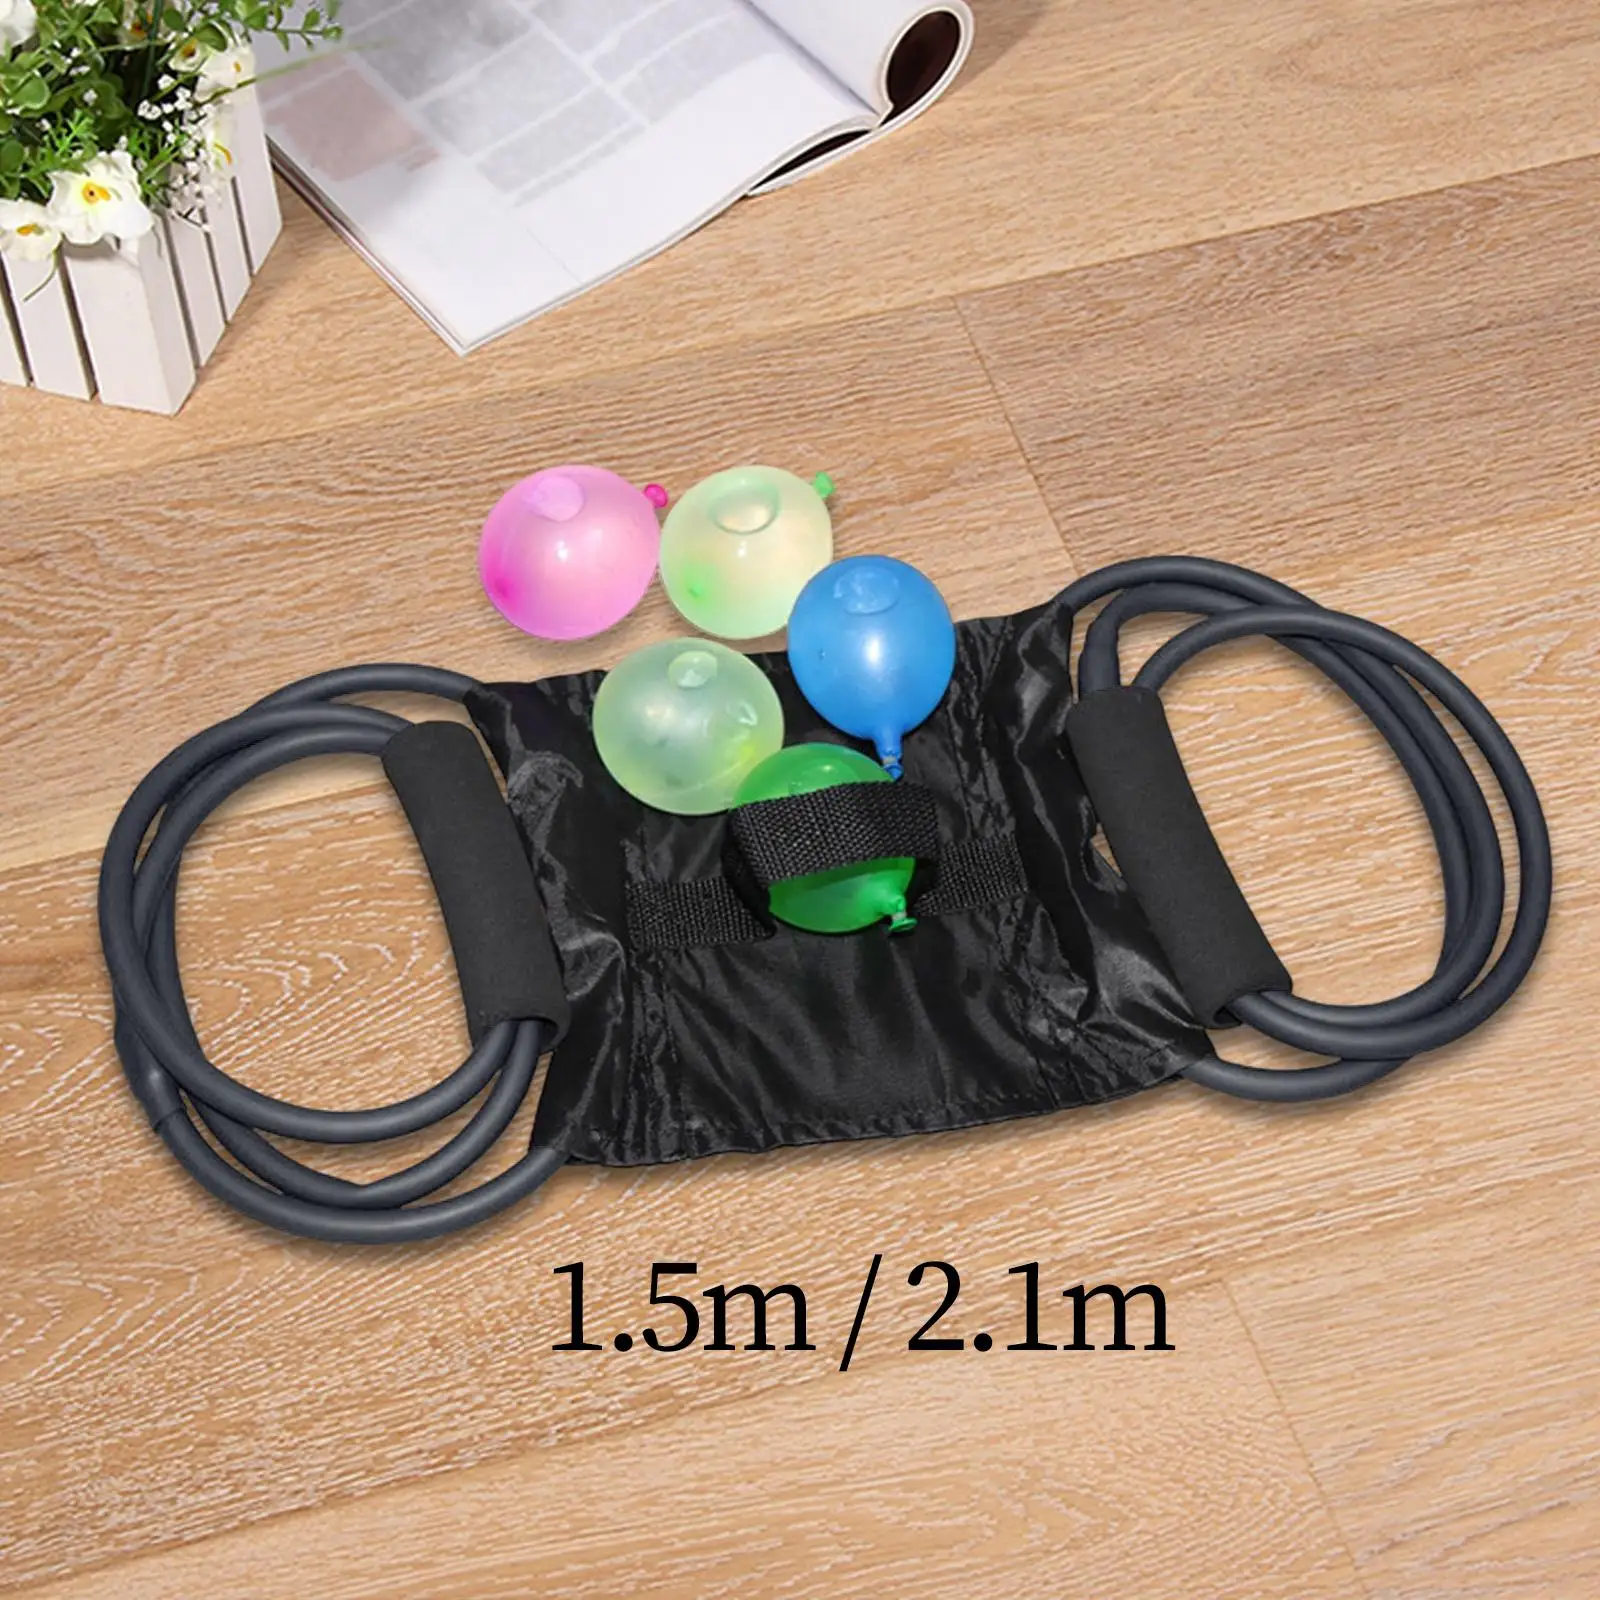 Water Balloon Launcher Outdoor Machine Snowball Launcher Yard Game Water Toy 3 Person Slingshots for Festivals Funny Beach Party